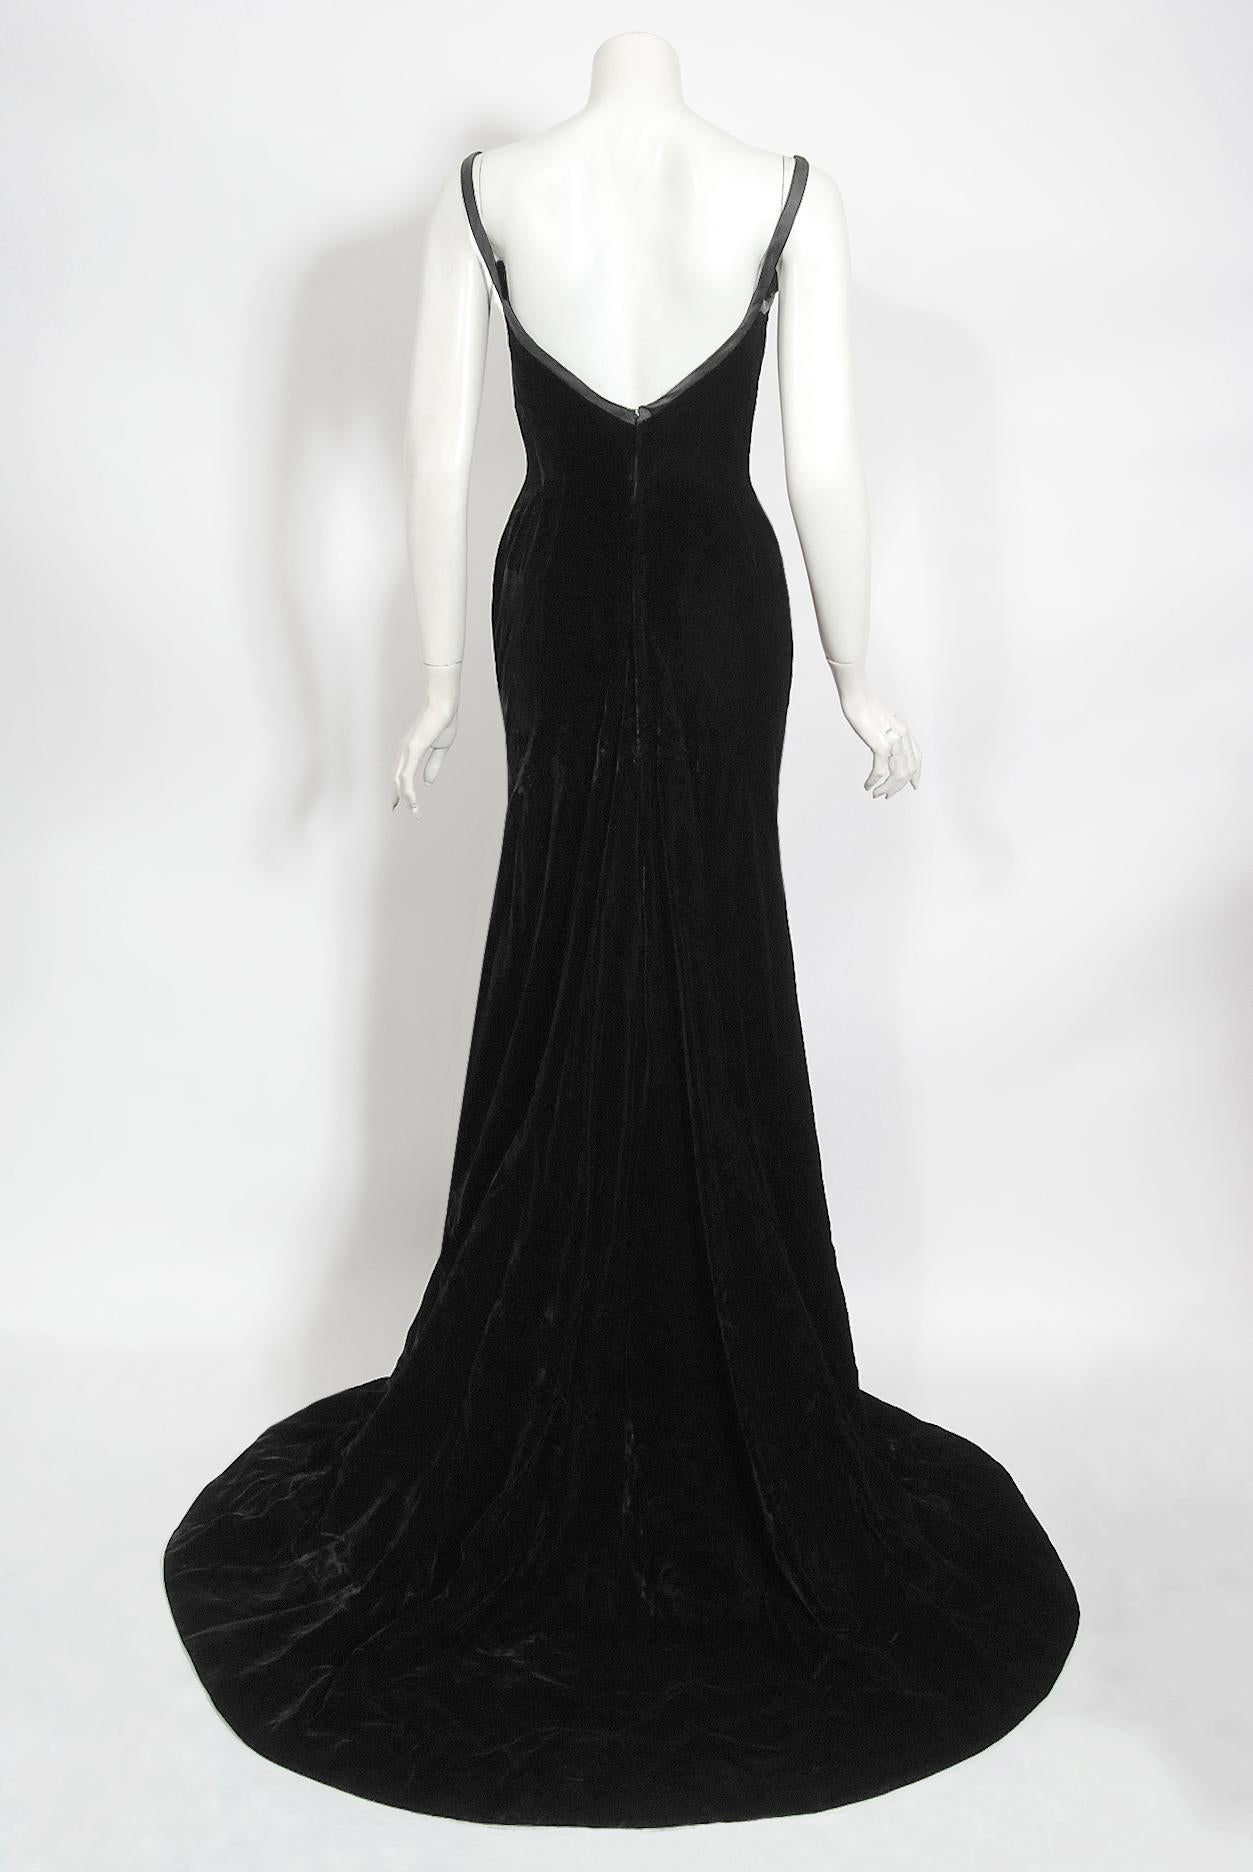 Vintage 1967 Don Loper Couture For Barbra Streisand Black Hourglass Gown & Hat 7